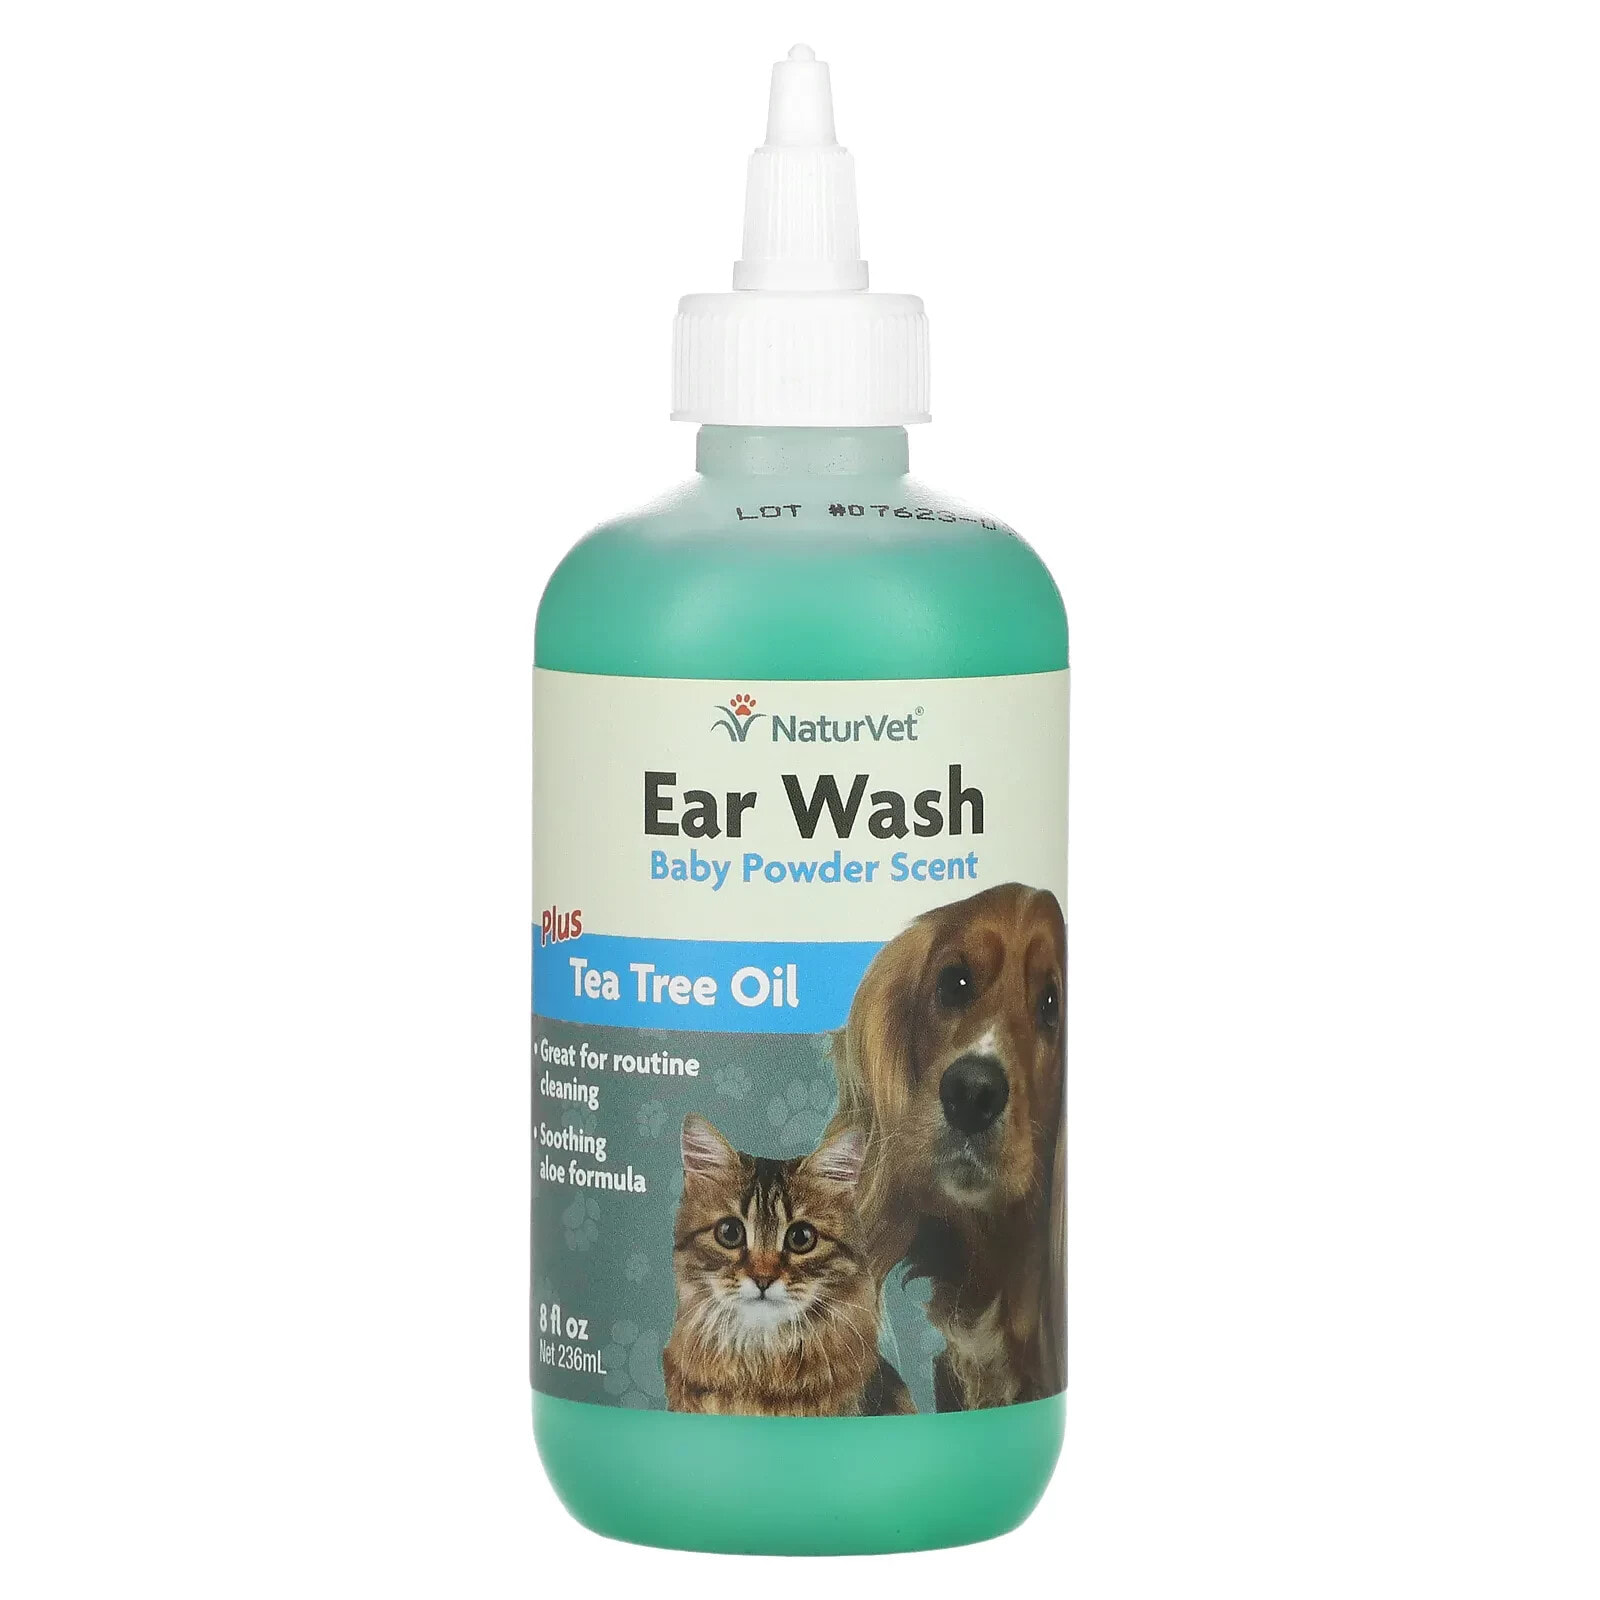 Ear Wash + Tea Tree Oil, For Dogs & Cats, Baby Powder Scent, 8 fl oz (236 ml)